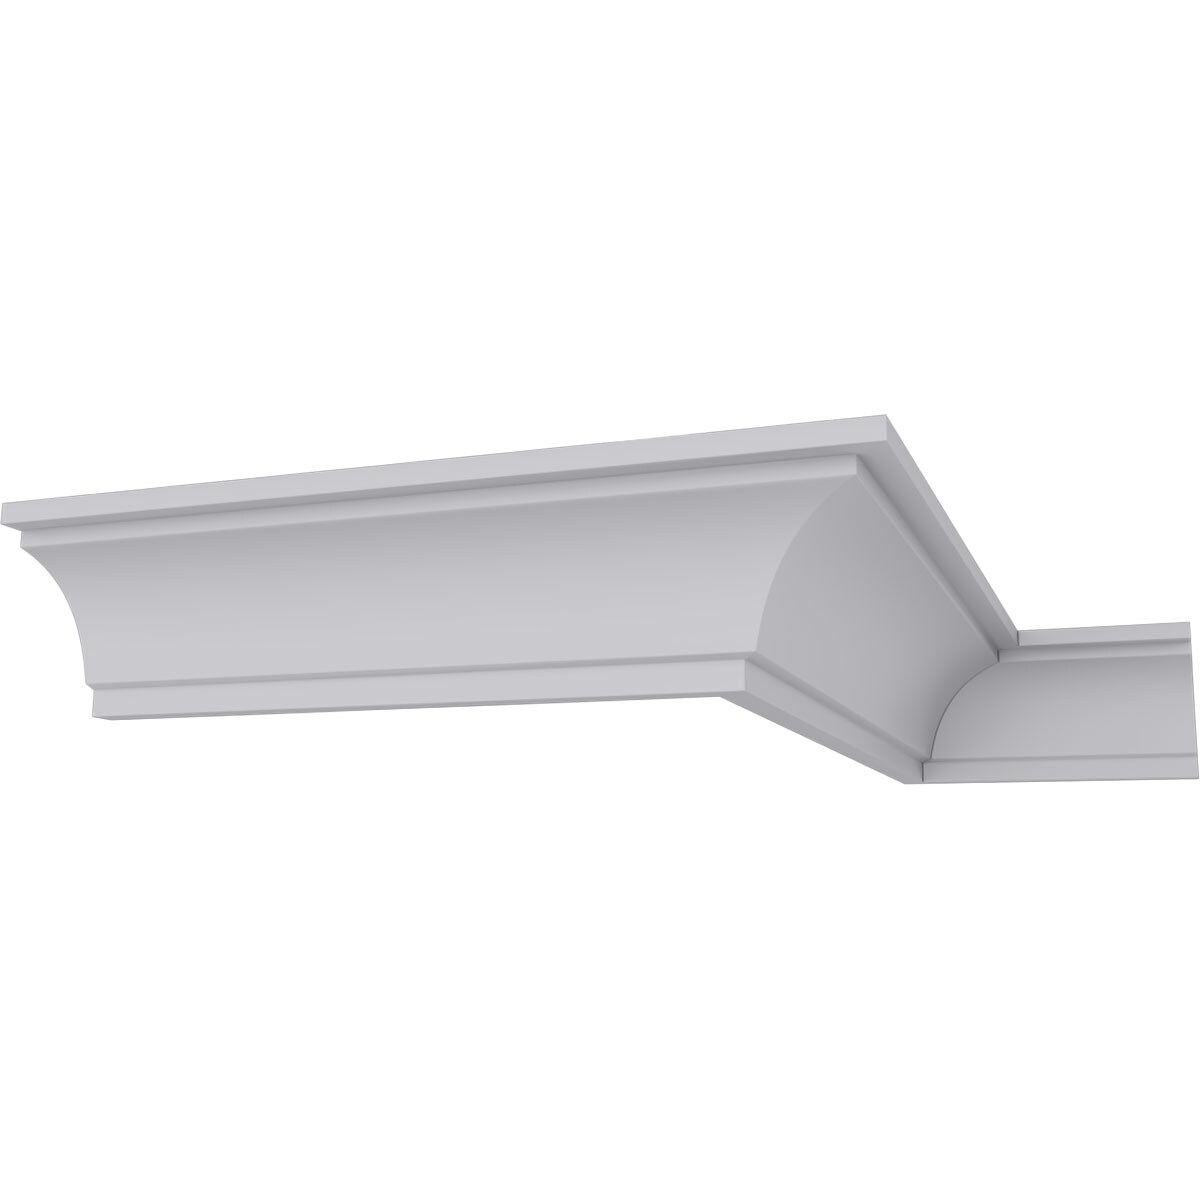 Ekena Millwork Tyrone Smooth 1-1/2-in x 7-ft 10-1/2-in Primed 